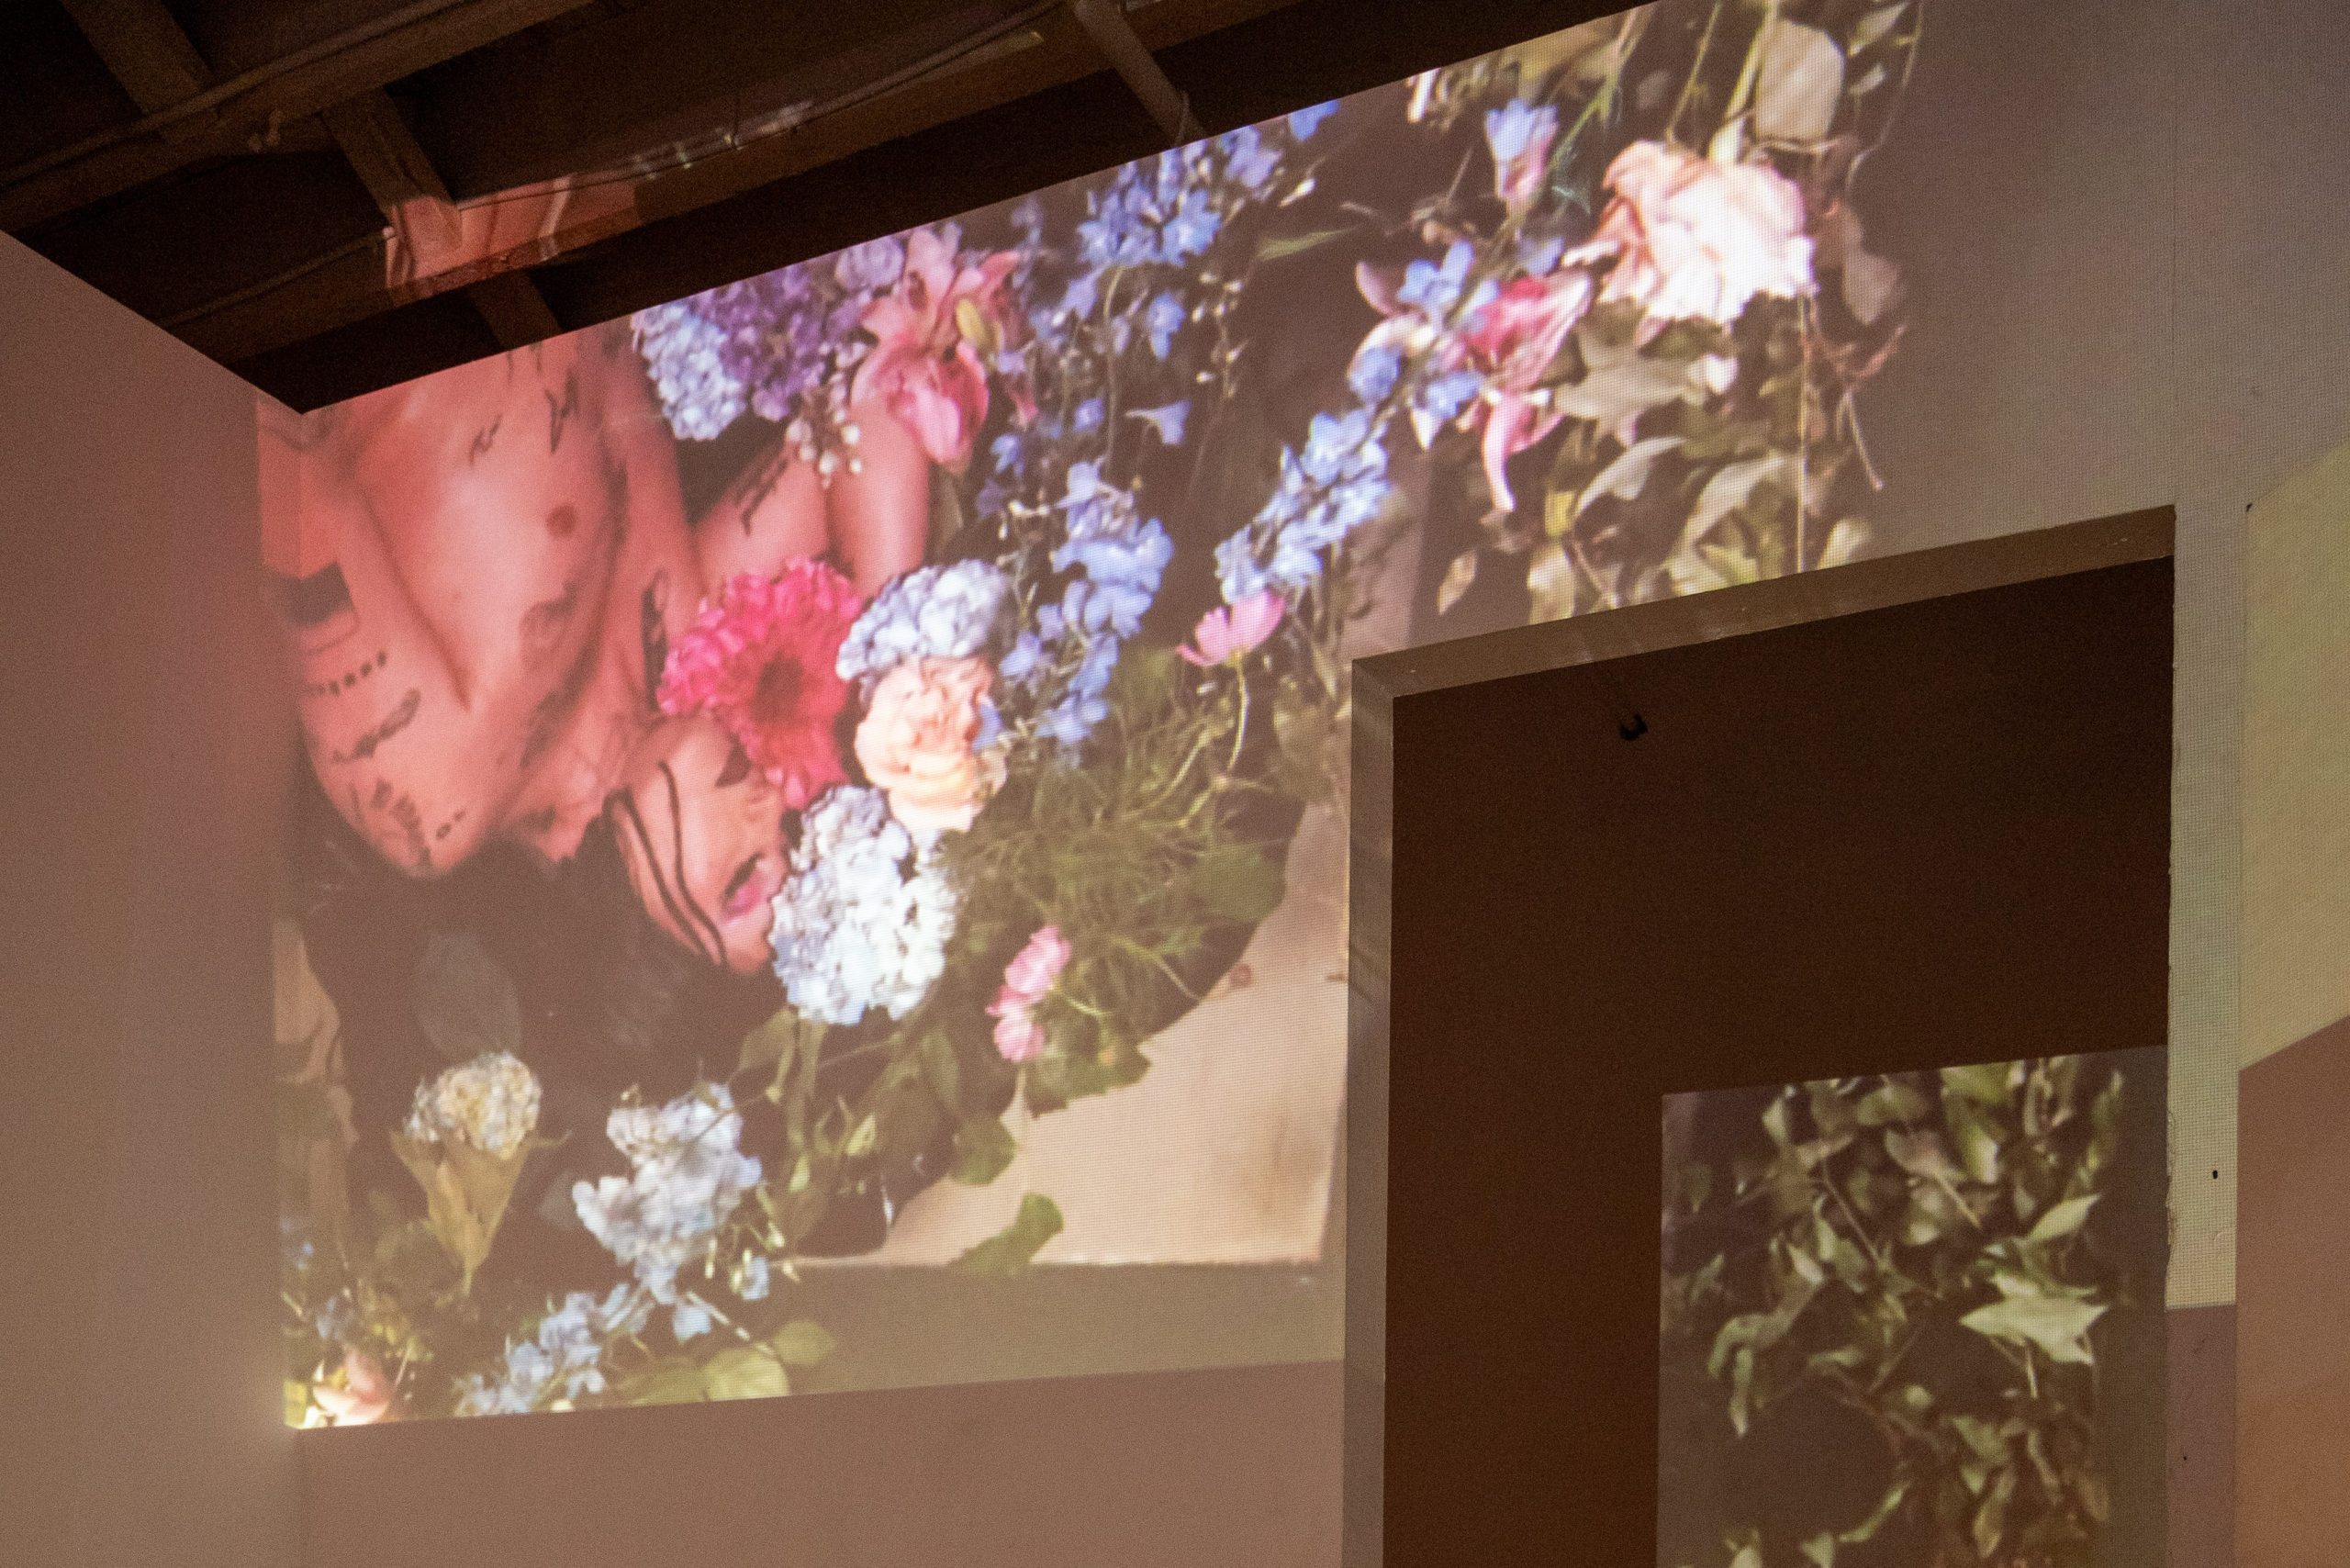 Image: A still shot of “At Rest,” a collaboration between Vince Phan and Ále Campos, presented by Jude Gallery. A livestream of a figure sleeping in a bed of flowers is projected over a doorway. Photo by Tonal Simmons.